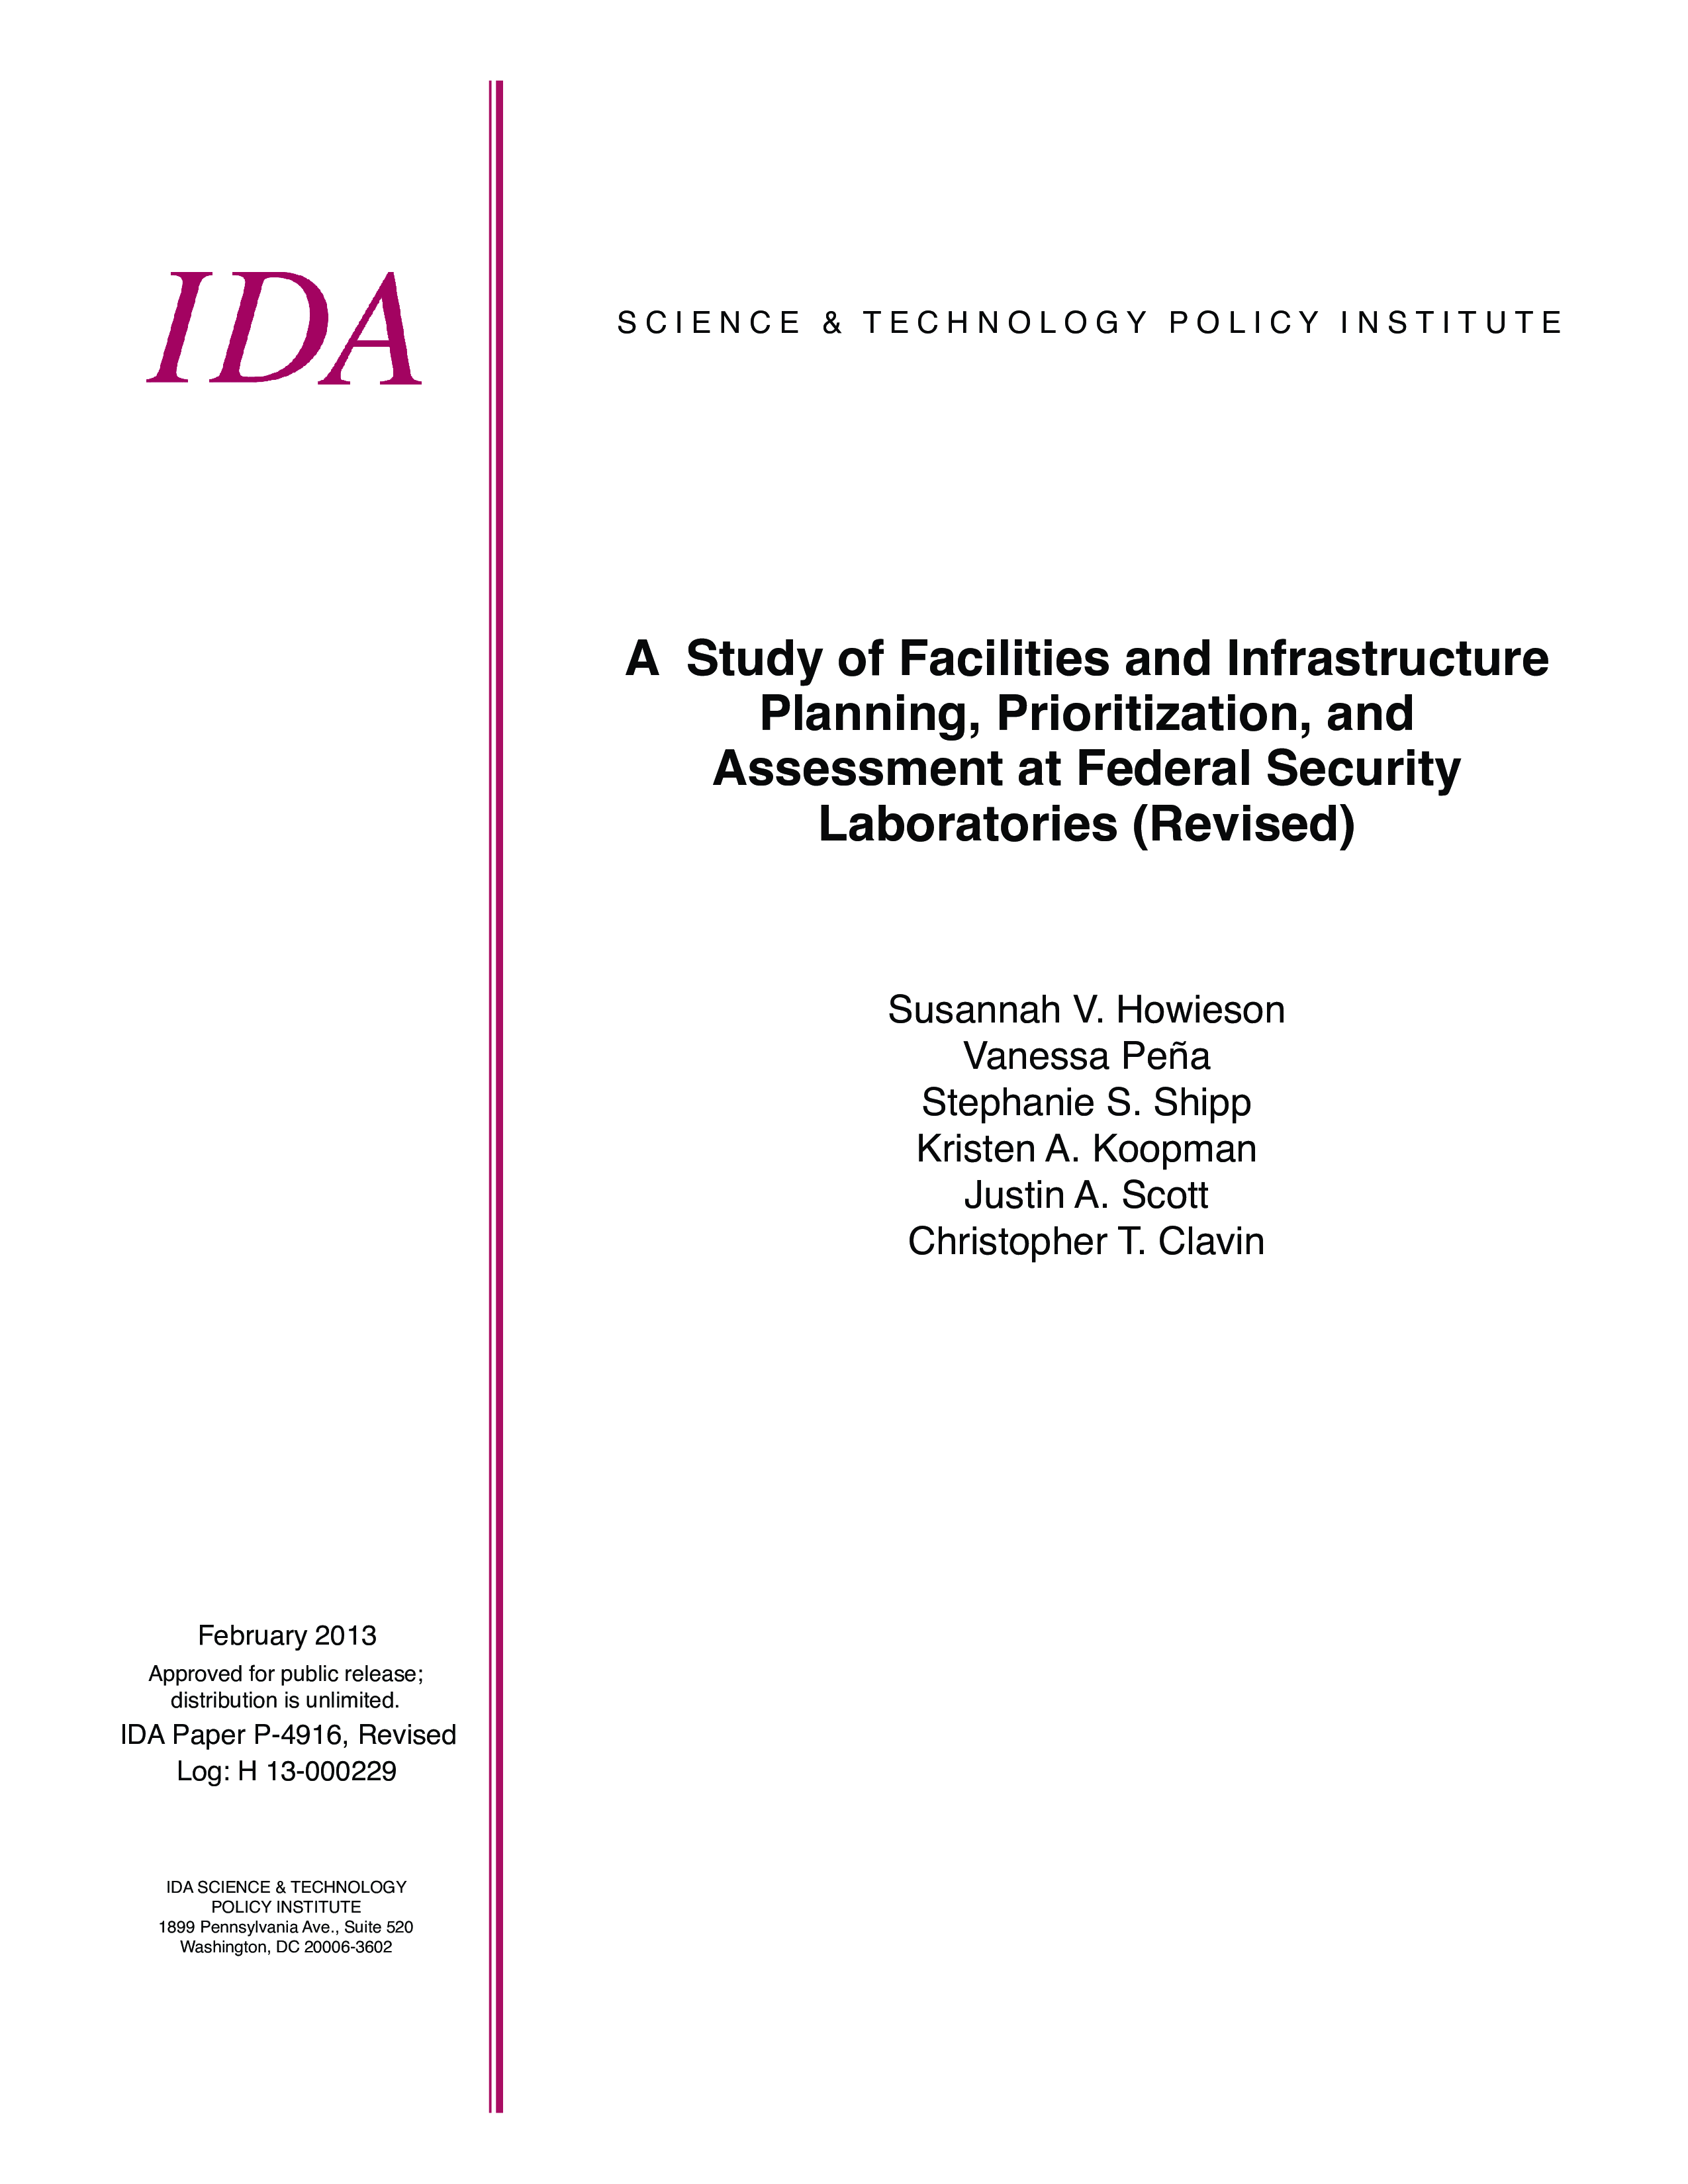 A Study of Facilities and Infrastructure Planning, Prioritization, and Assessment at Federal Security Laboratories (Revised)